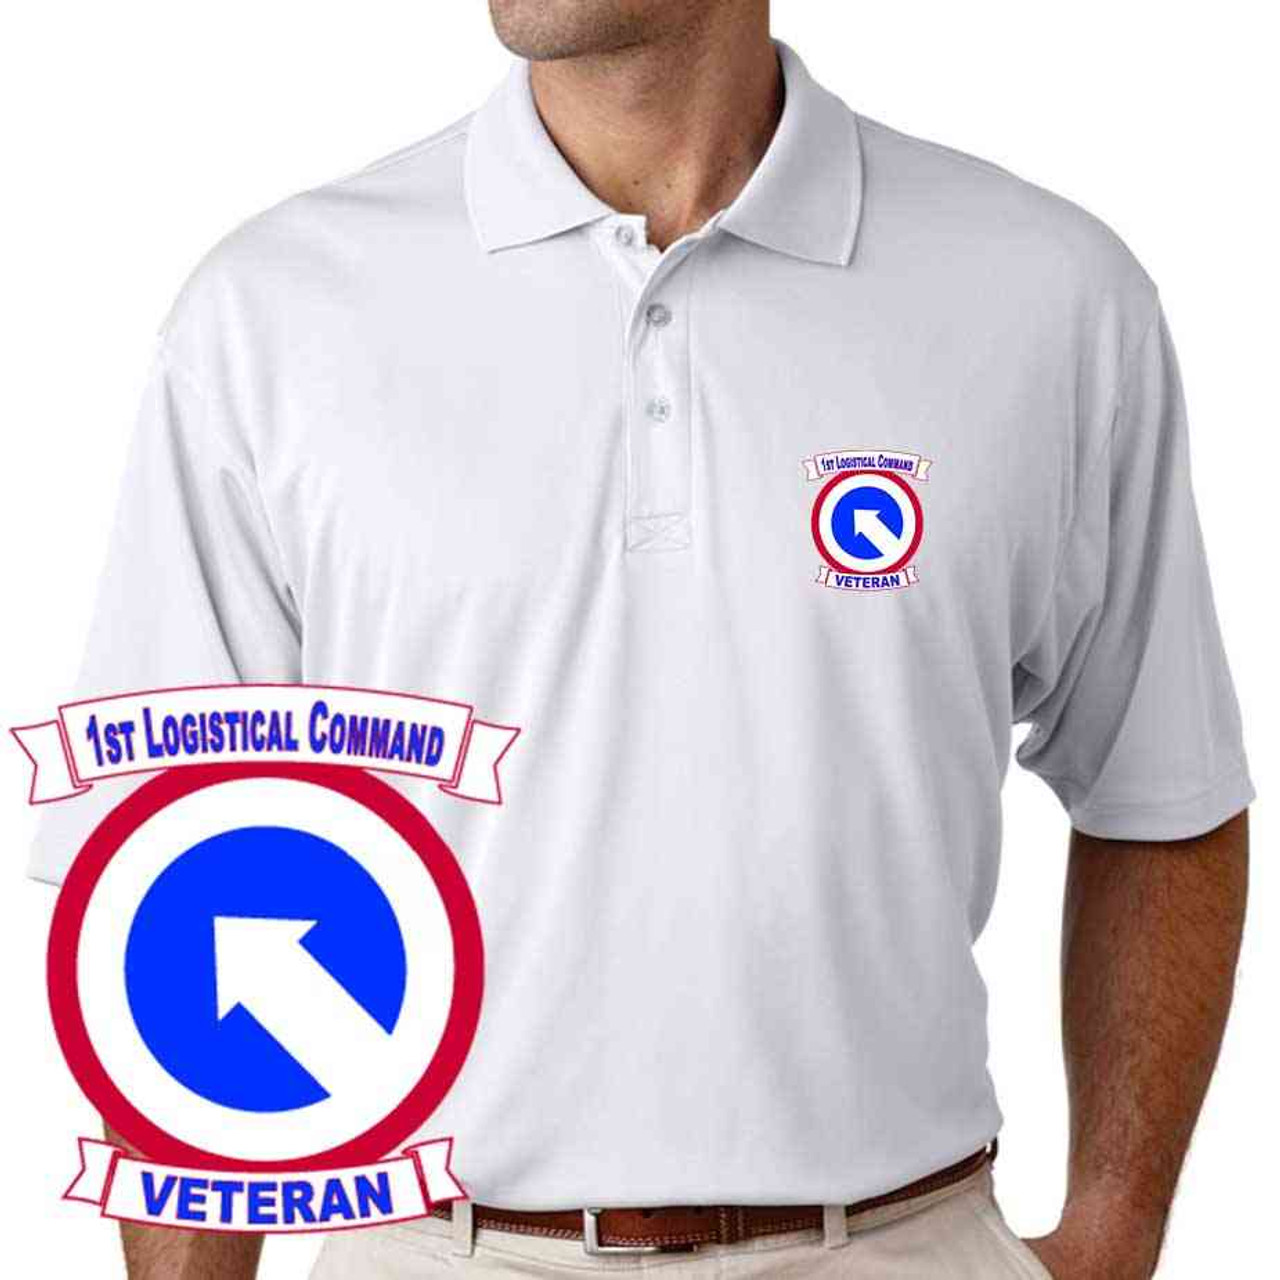 army 1st logistical command veteran performance polo shirt